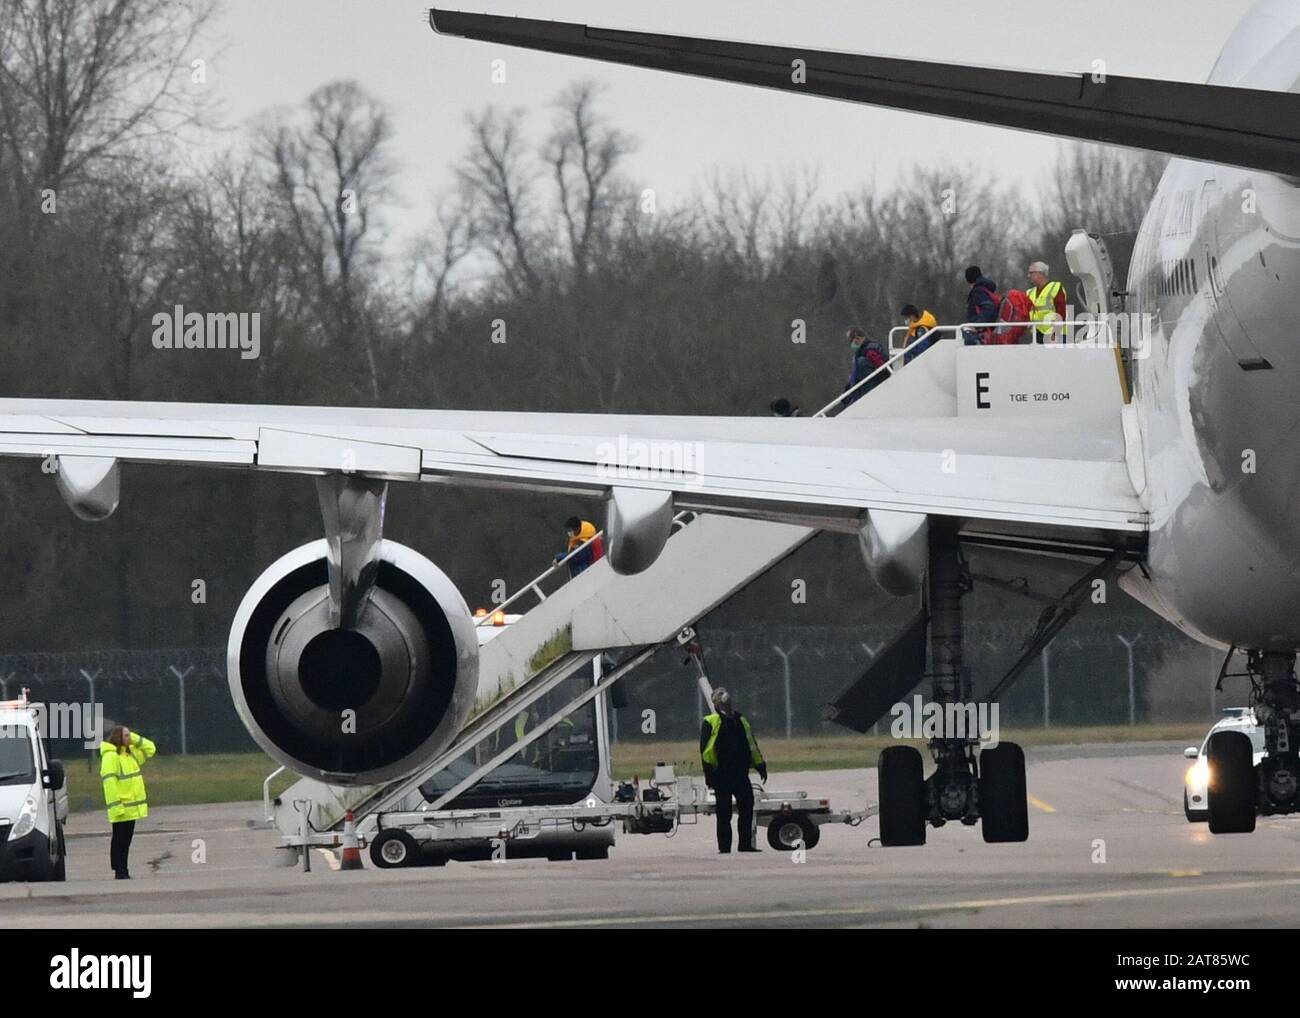 Passengers disembark from the plane carrying British nationals from the coronavirus-hit city of Wuhan in China, arrives at RAF Brize Norton in Oxfordshire. Stock Photo